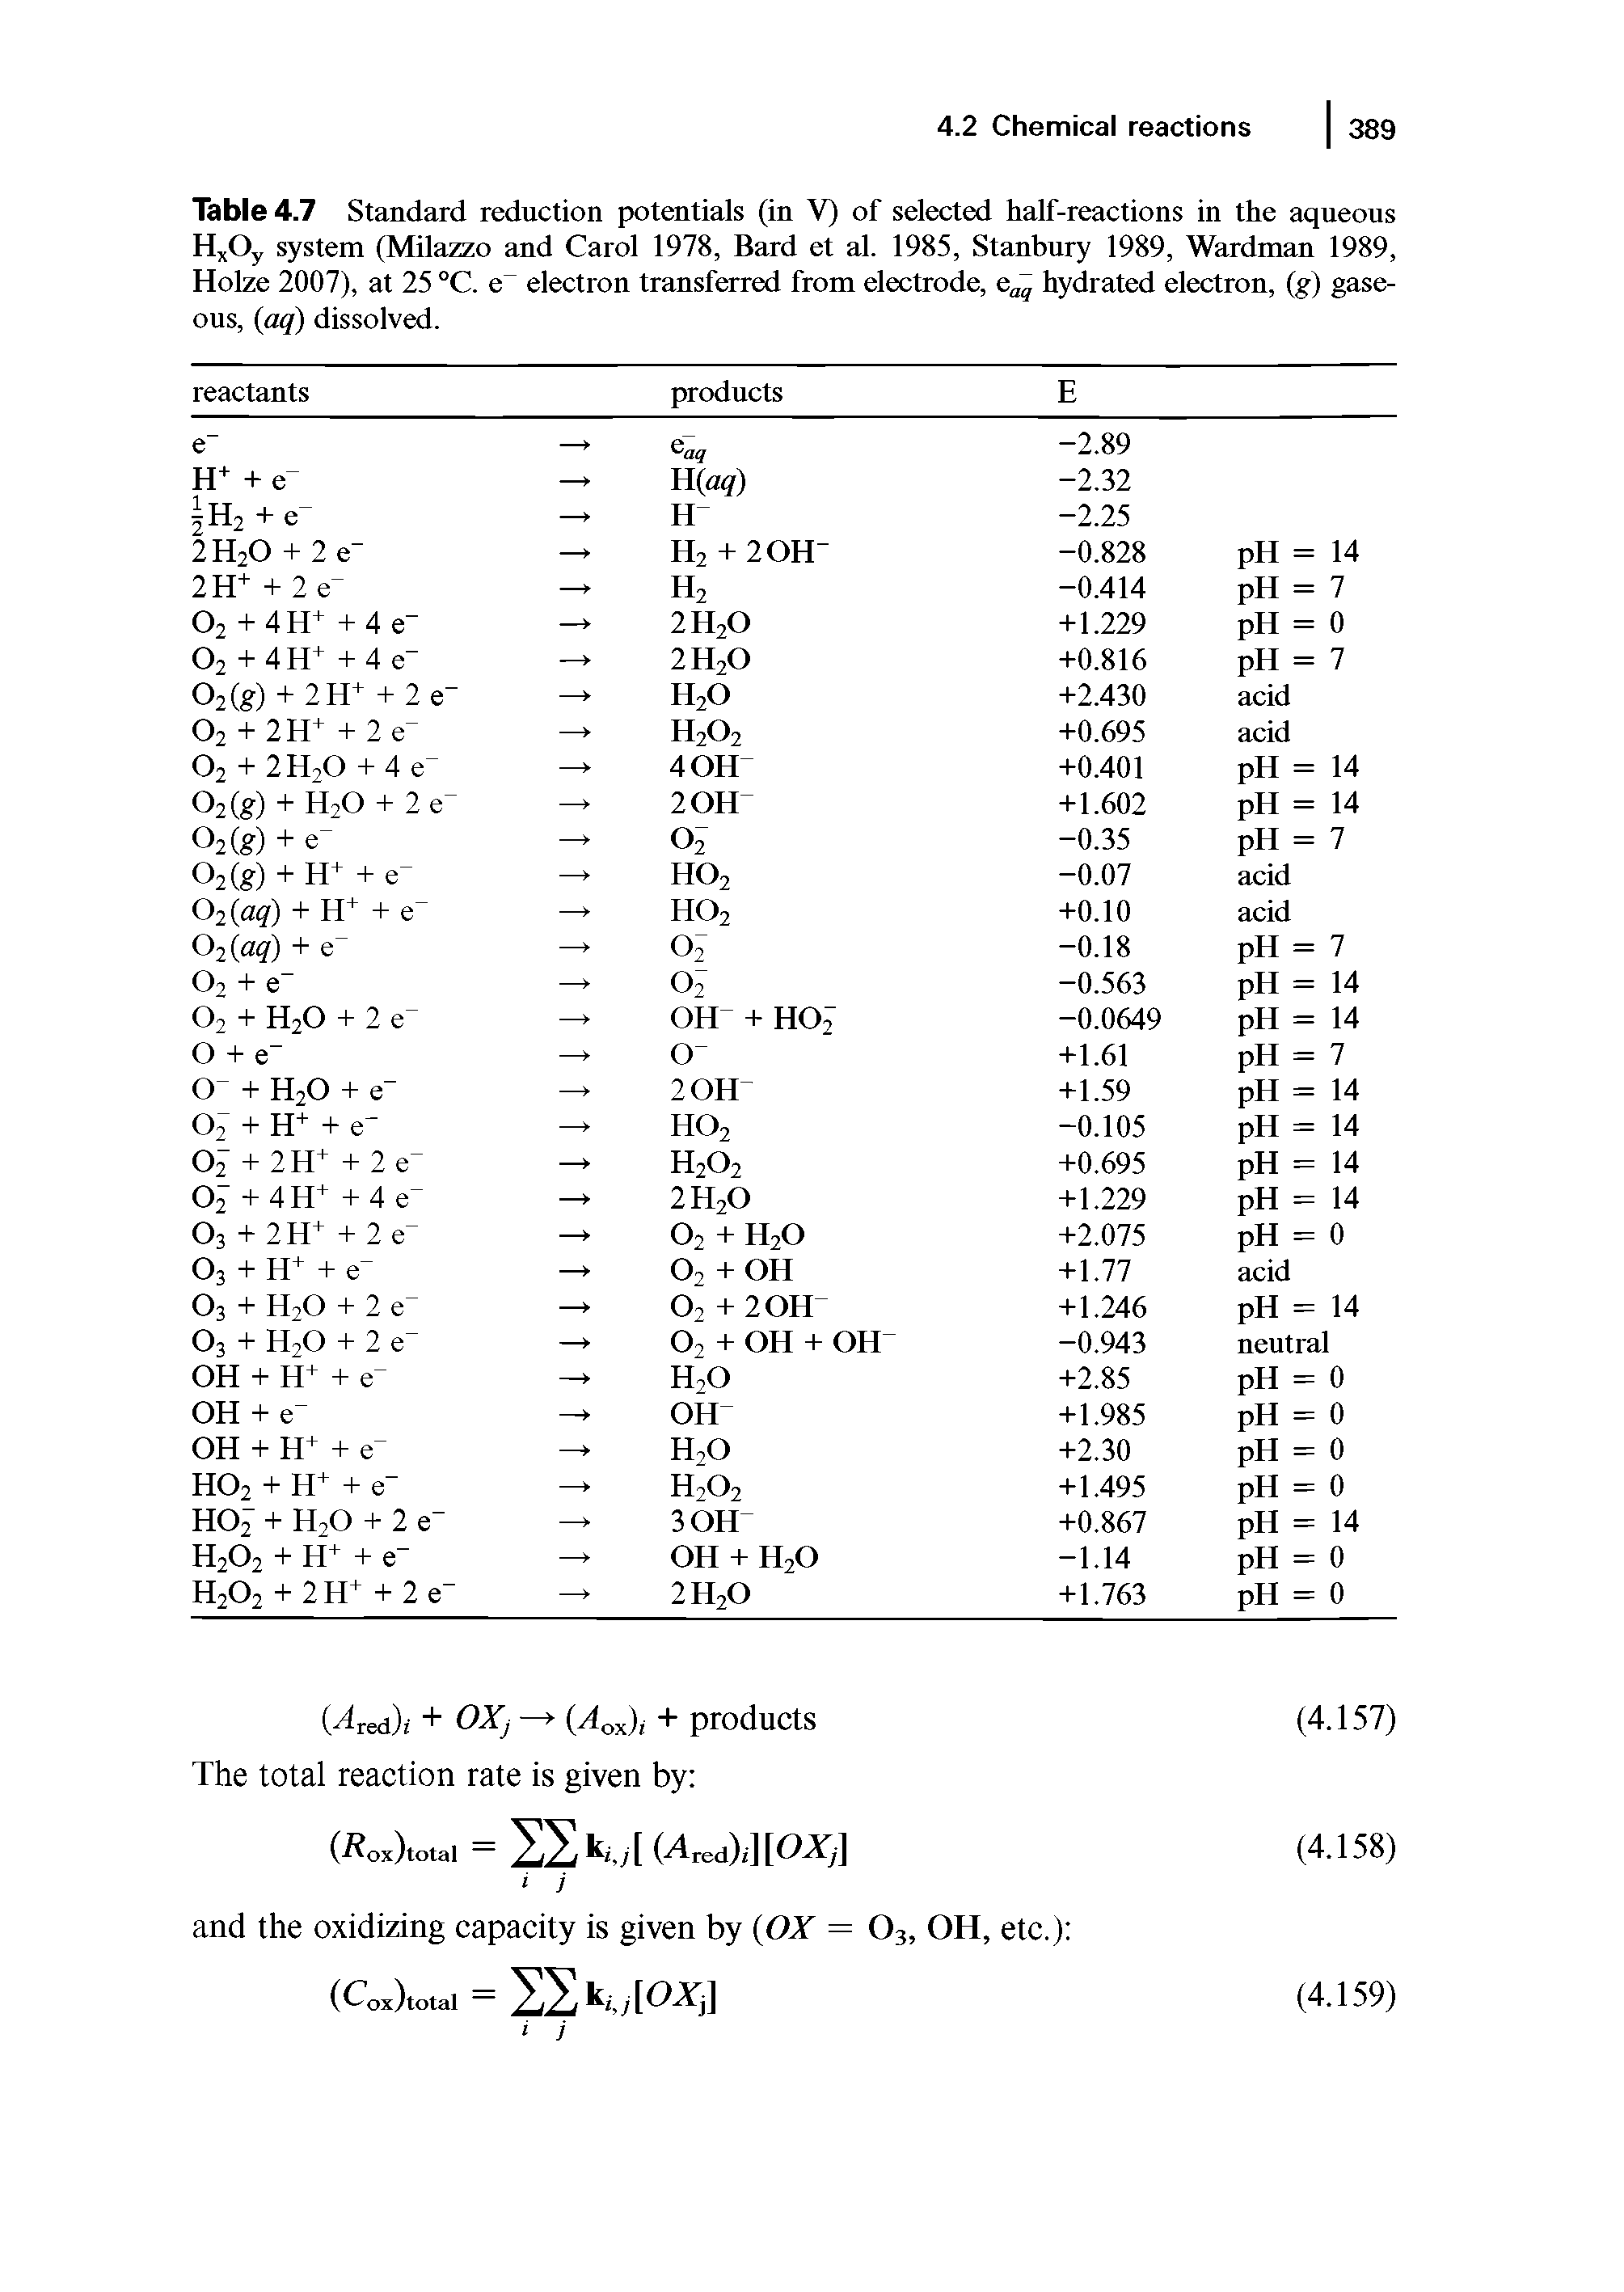 Table 4.7 Standard reduction potentials (in V) of selected half-reactions in the aqueous H Oy system (Milazzo and Carol 1978, Bard et al. 1985, Stanbury 1989, Wardman 1989, Holze 2007), at 25 °C. e electron transferred from electrode, hydrated electron, (g) gase-ons, aq) dissolved.